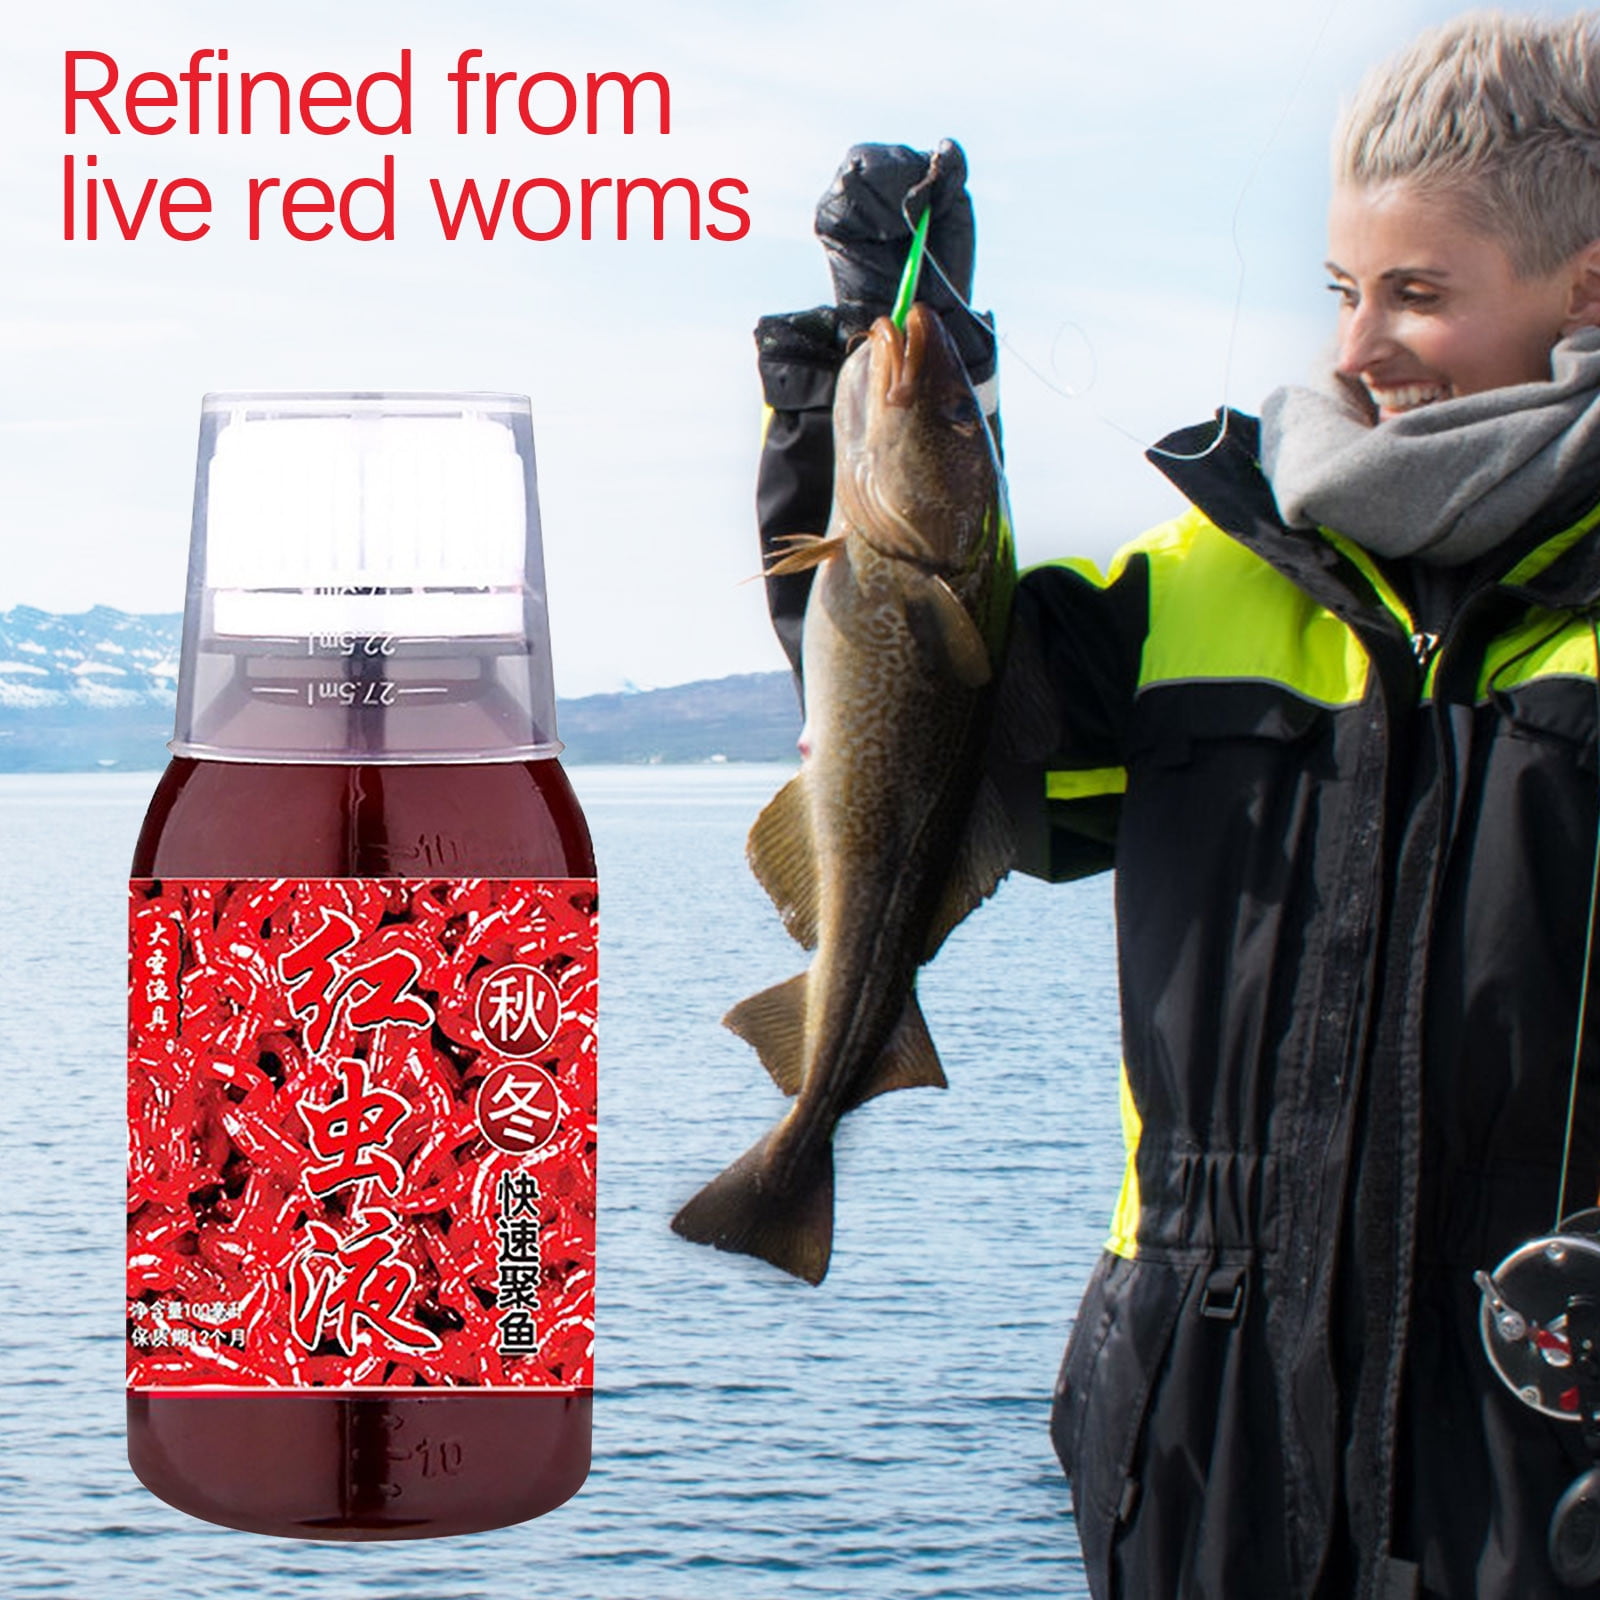 SDJMa Bait Fish Additive, 100ml Red Worm Concentrate Liquid, Fishing Baits,  High Concentration Fishing Lures, Fish Bait Attraction Enhancer for Trout,  Cod, Carp, Bass 